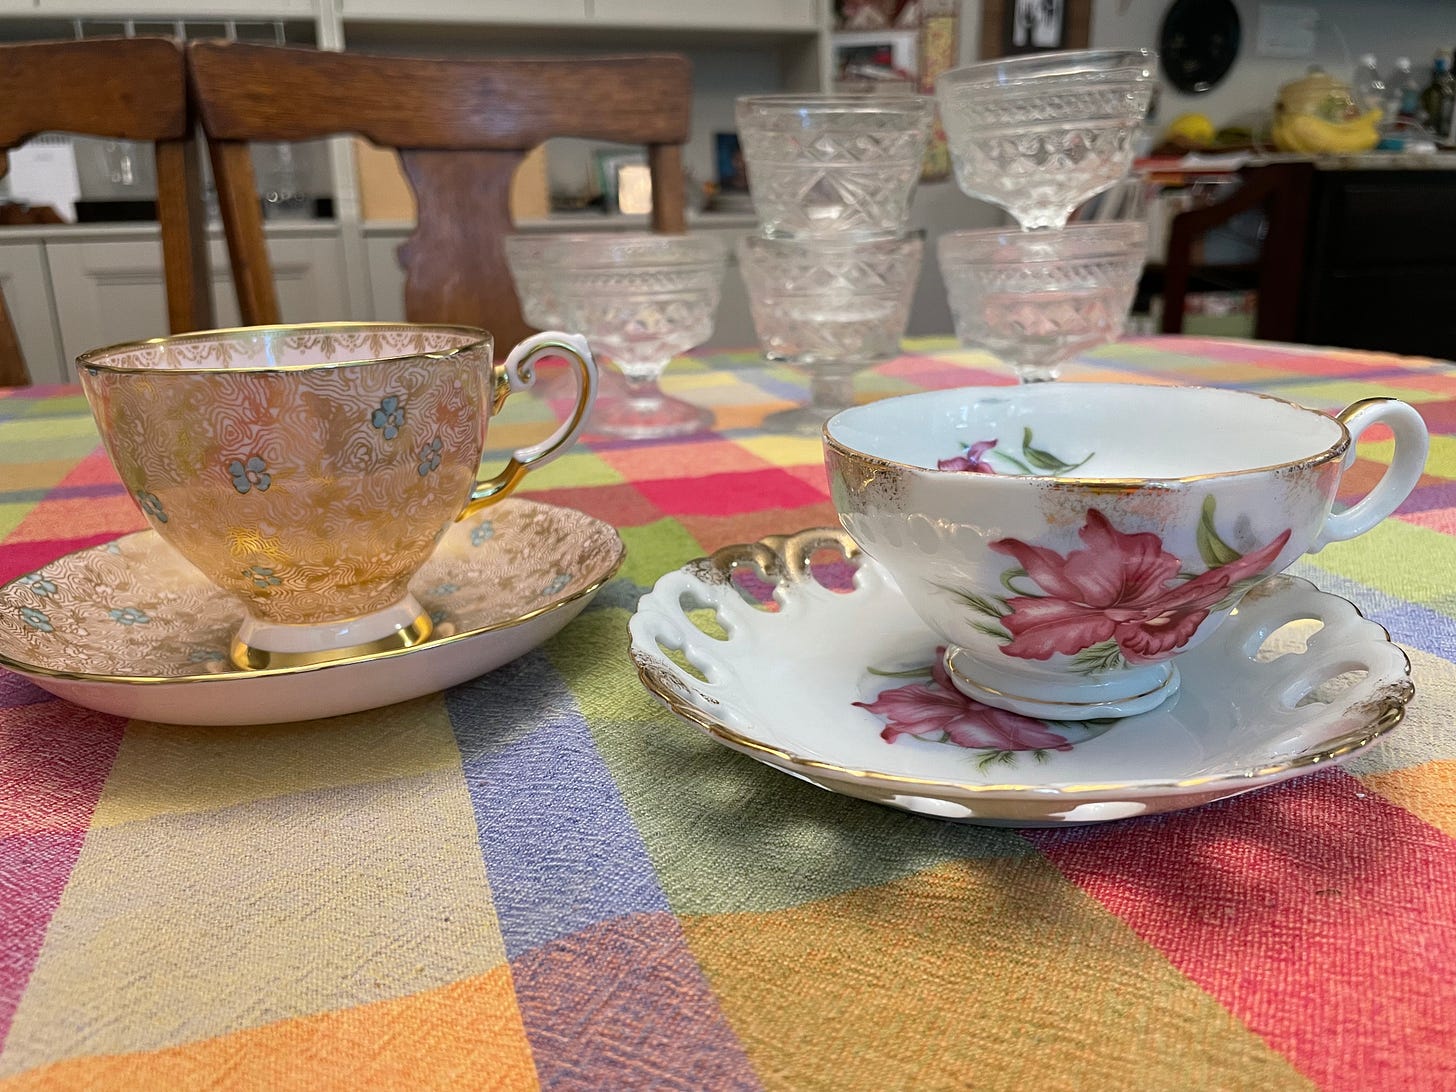 Two tea cups on a bright tablecloth